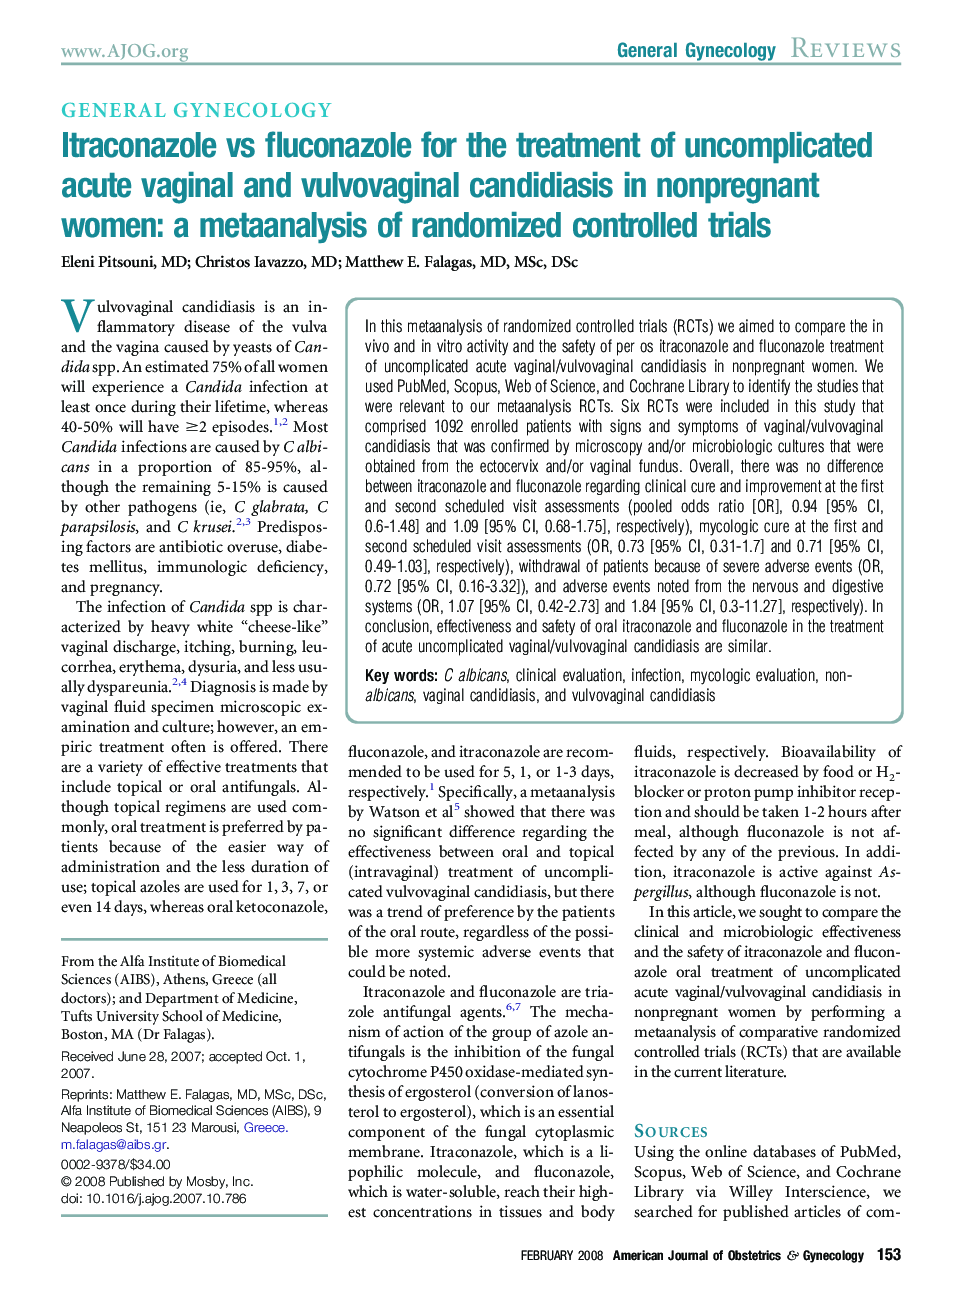 Itraconazole vs fluconazole for the treatment of uncomplicated acute vaginal and vulvovaginal candidiasis in nonpregnant women: a metaanalysis of randomized controlled trials